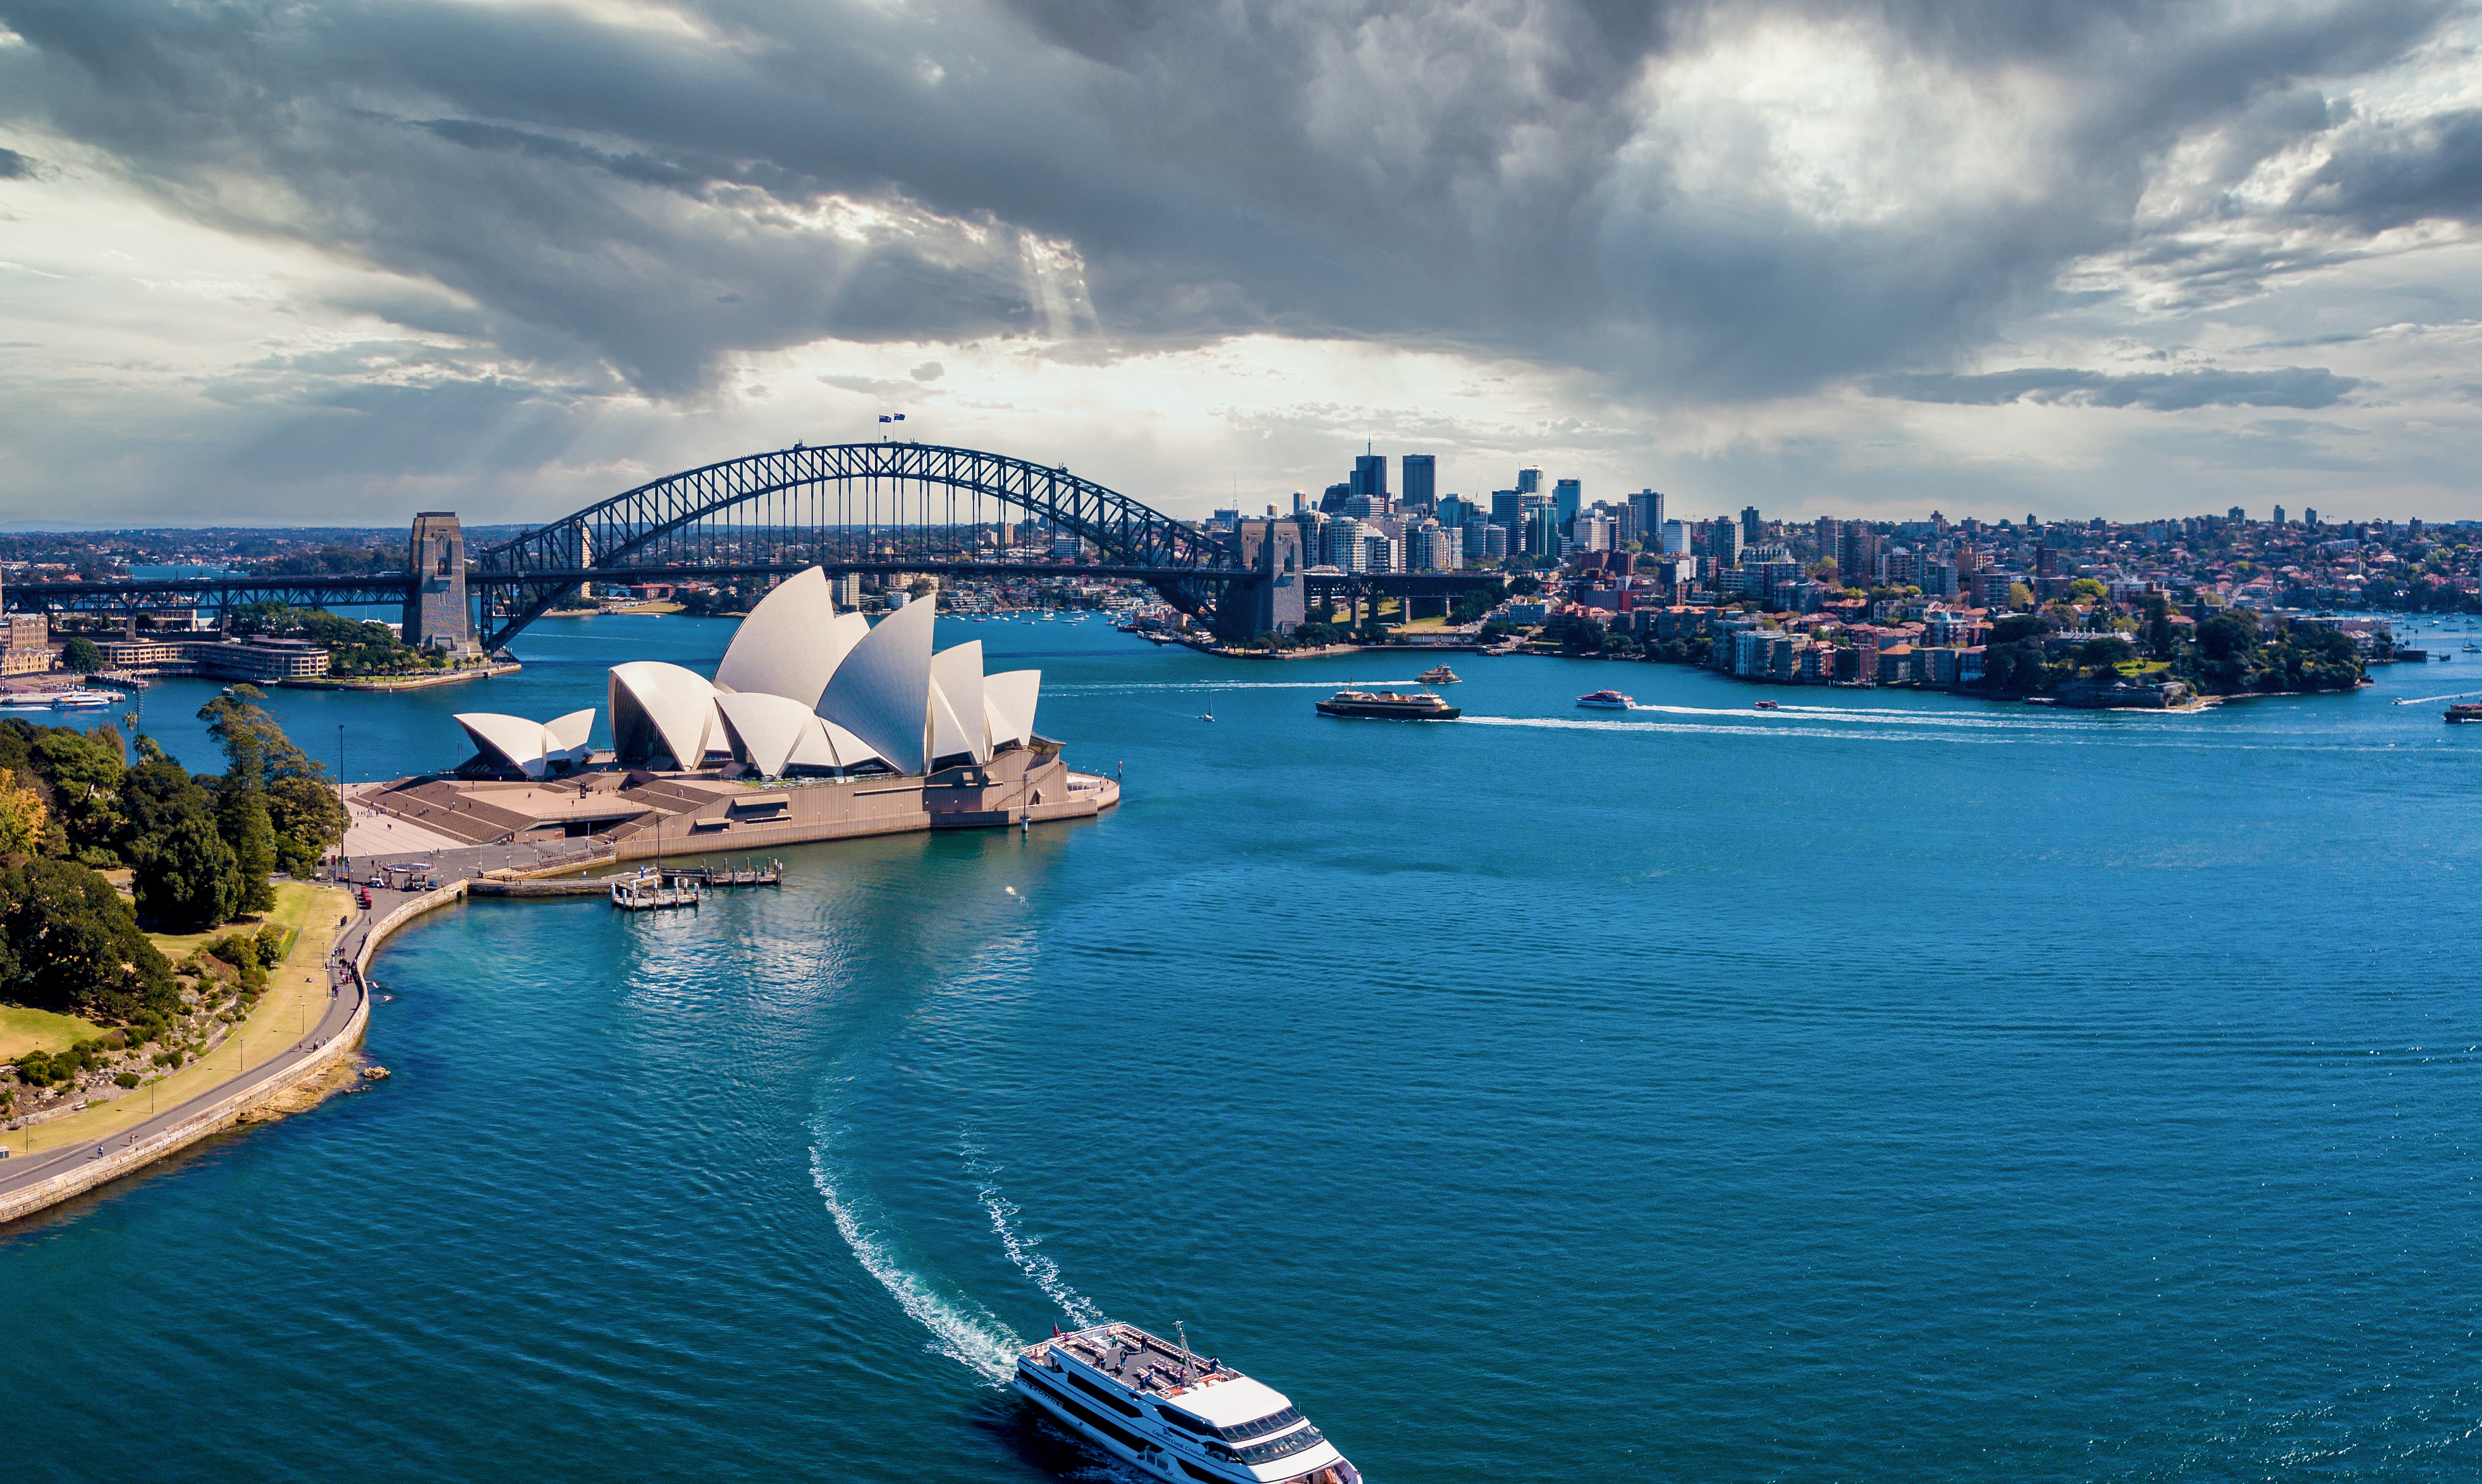 Consider a 15 Day Australia and New Zealand Vacation - Aerial View of Sydney, Australia